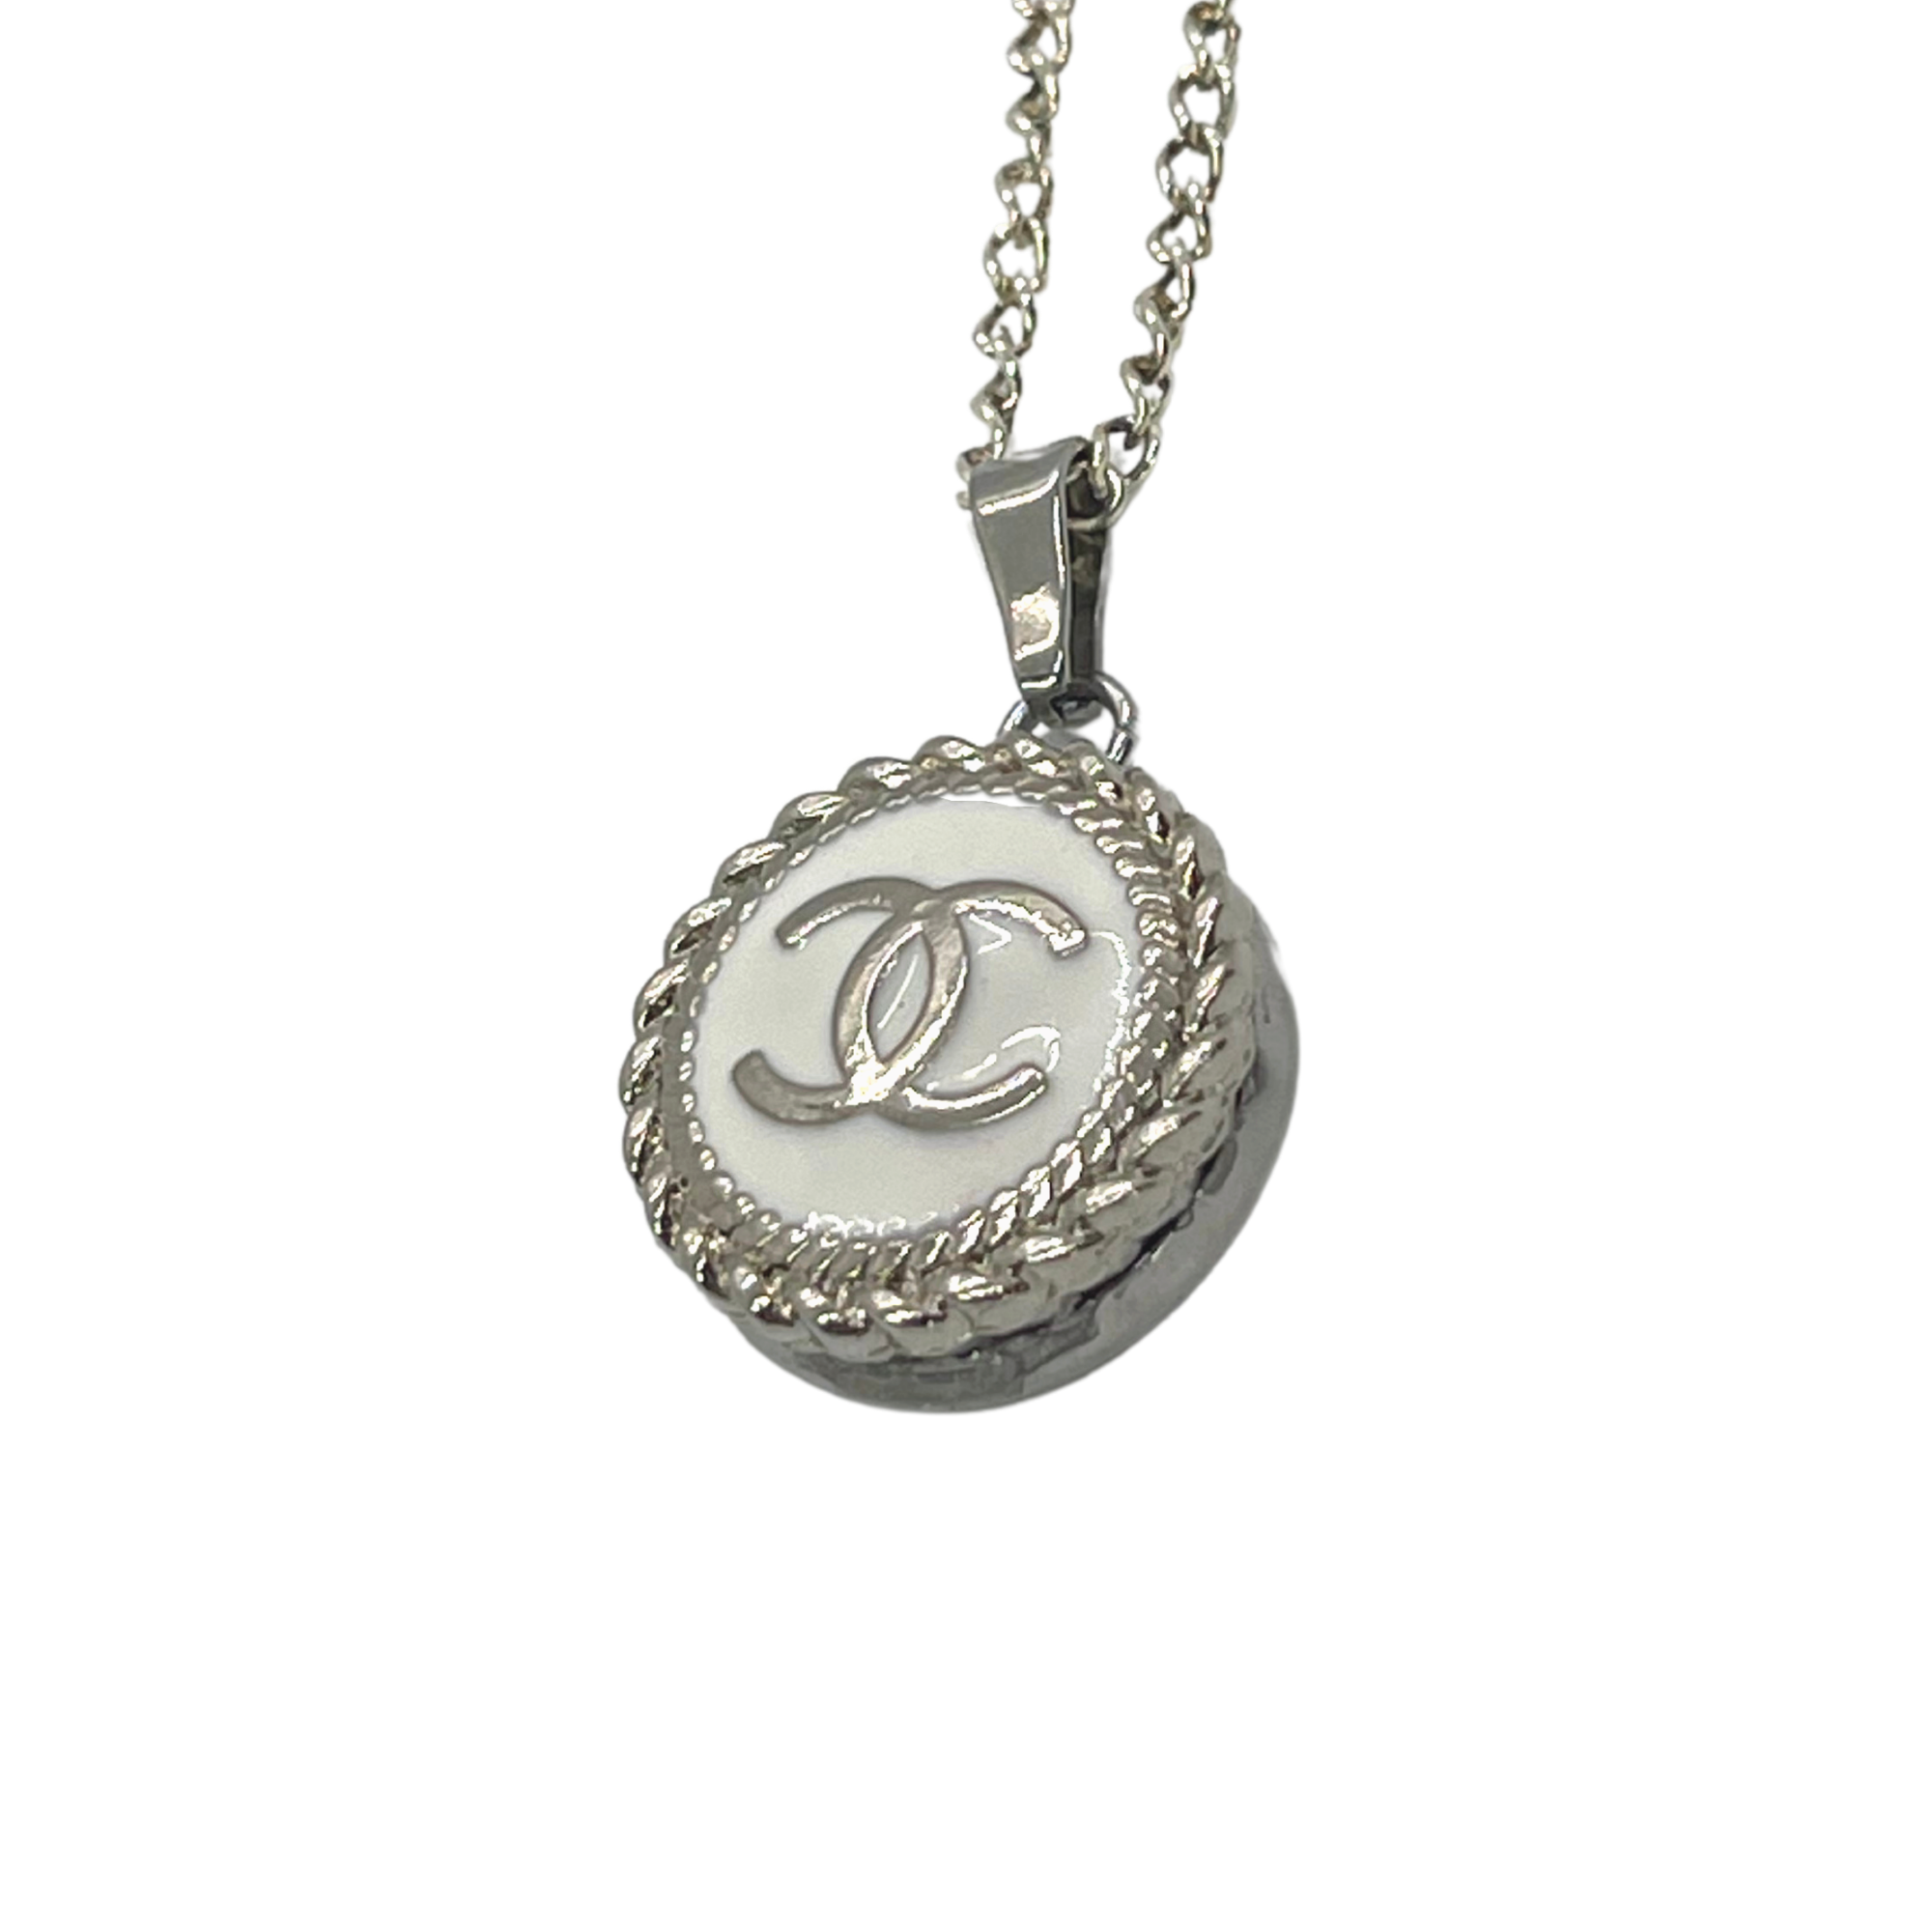 Cc necklace Chanel Silver in Metal  6919618